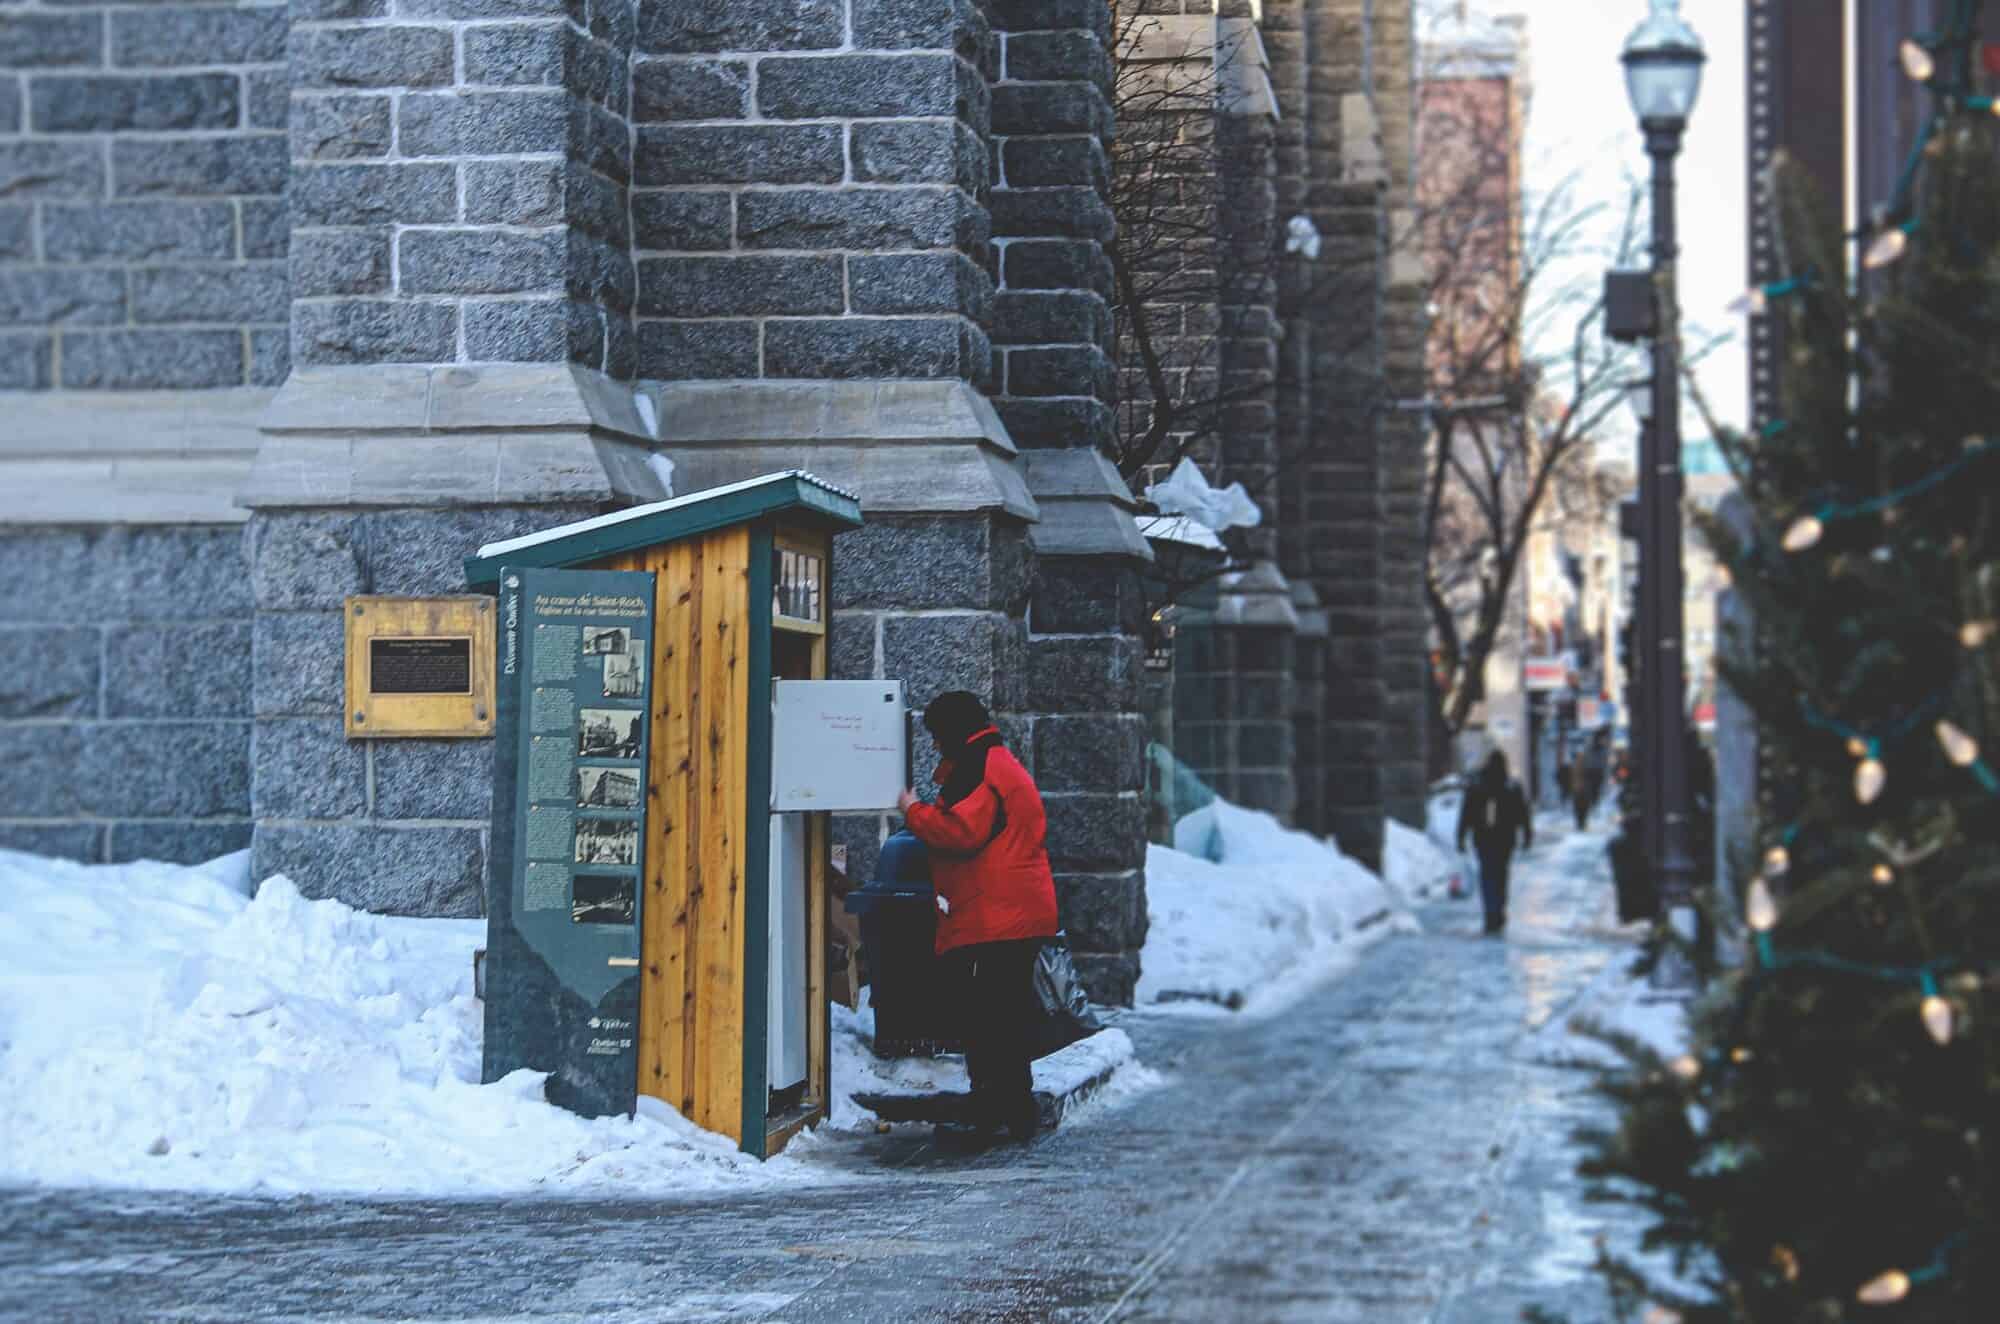 A person in need looks through a public fridge for food in the middle of a winter day.